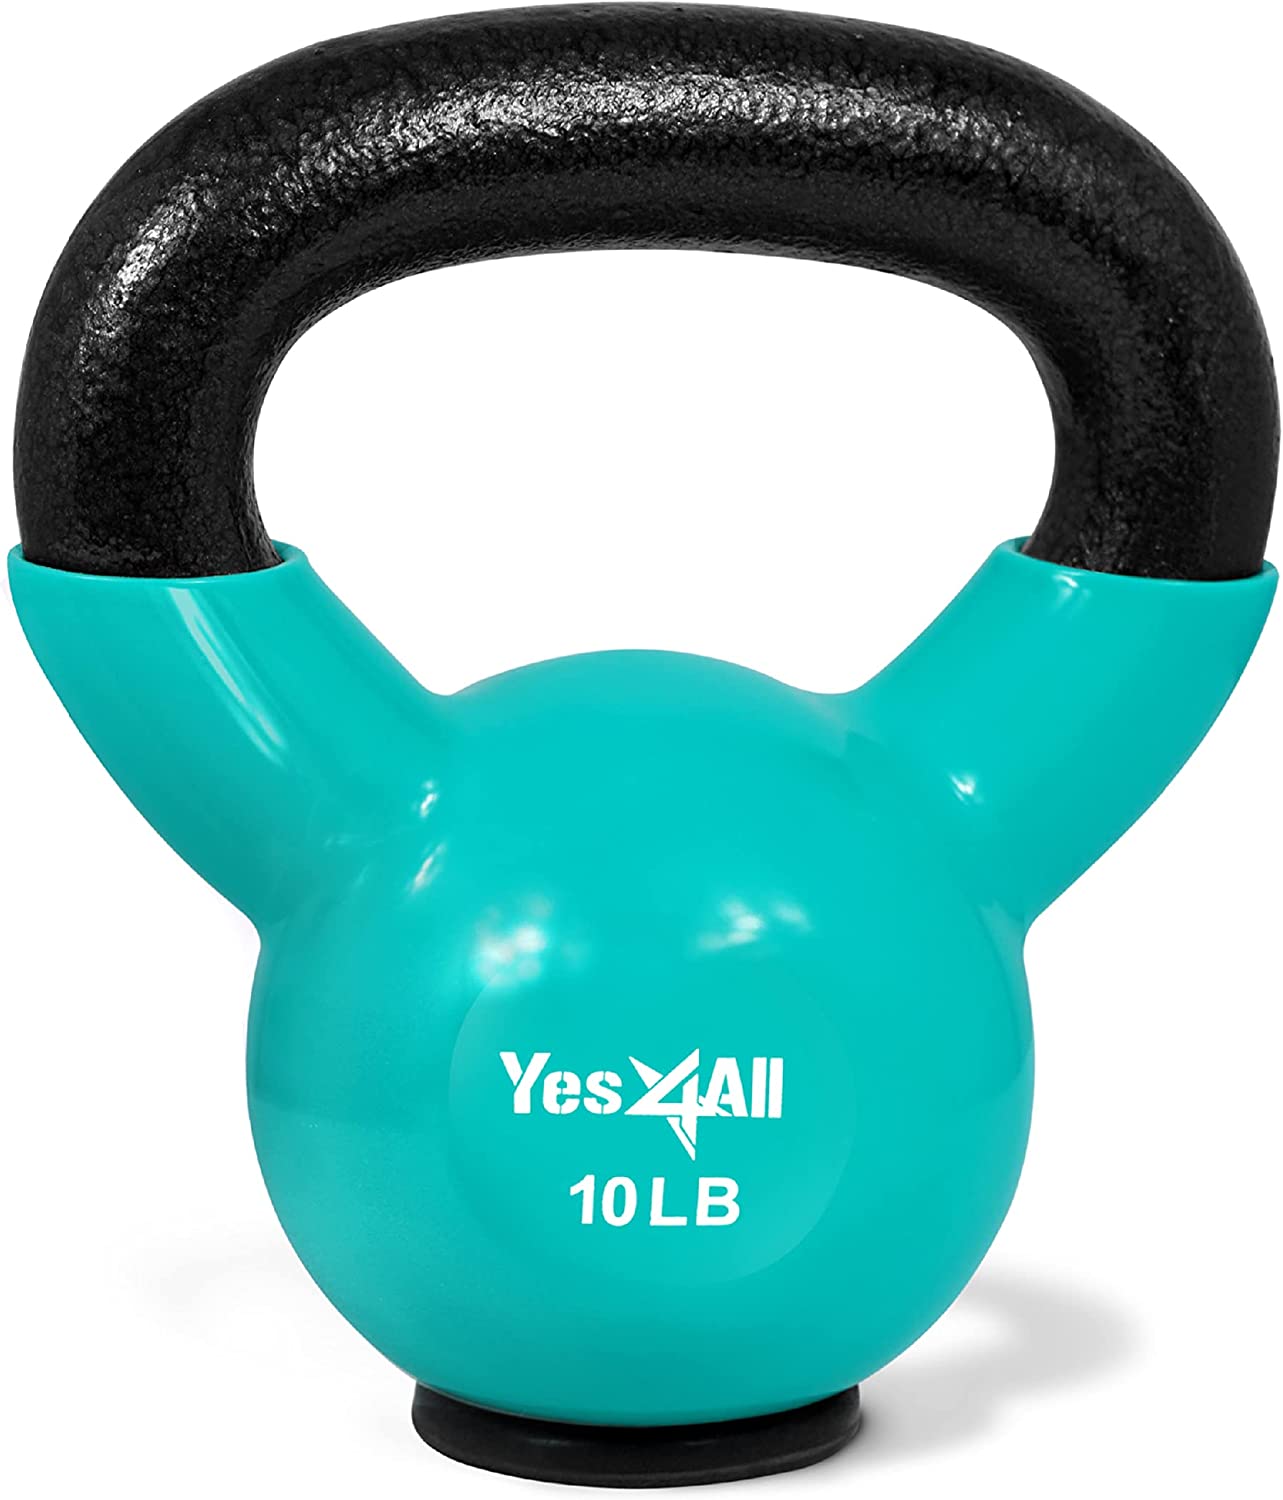 Yes4All 10lb Vinyl Coated / PVC Kettlebell with Rubber Base, Peacock Blue, Single - image 2 of 2